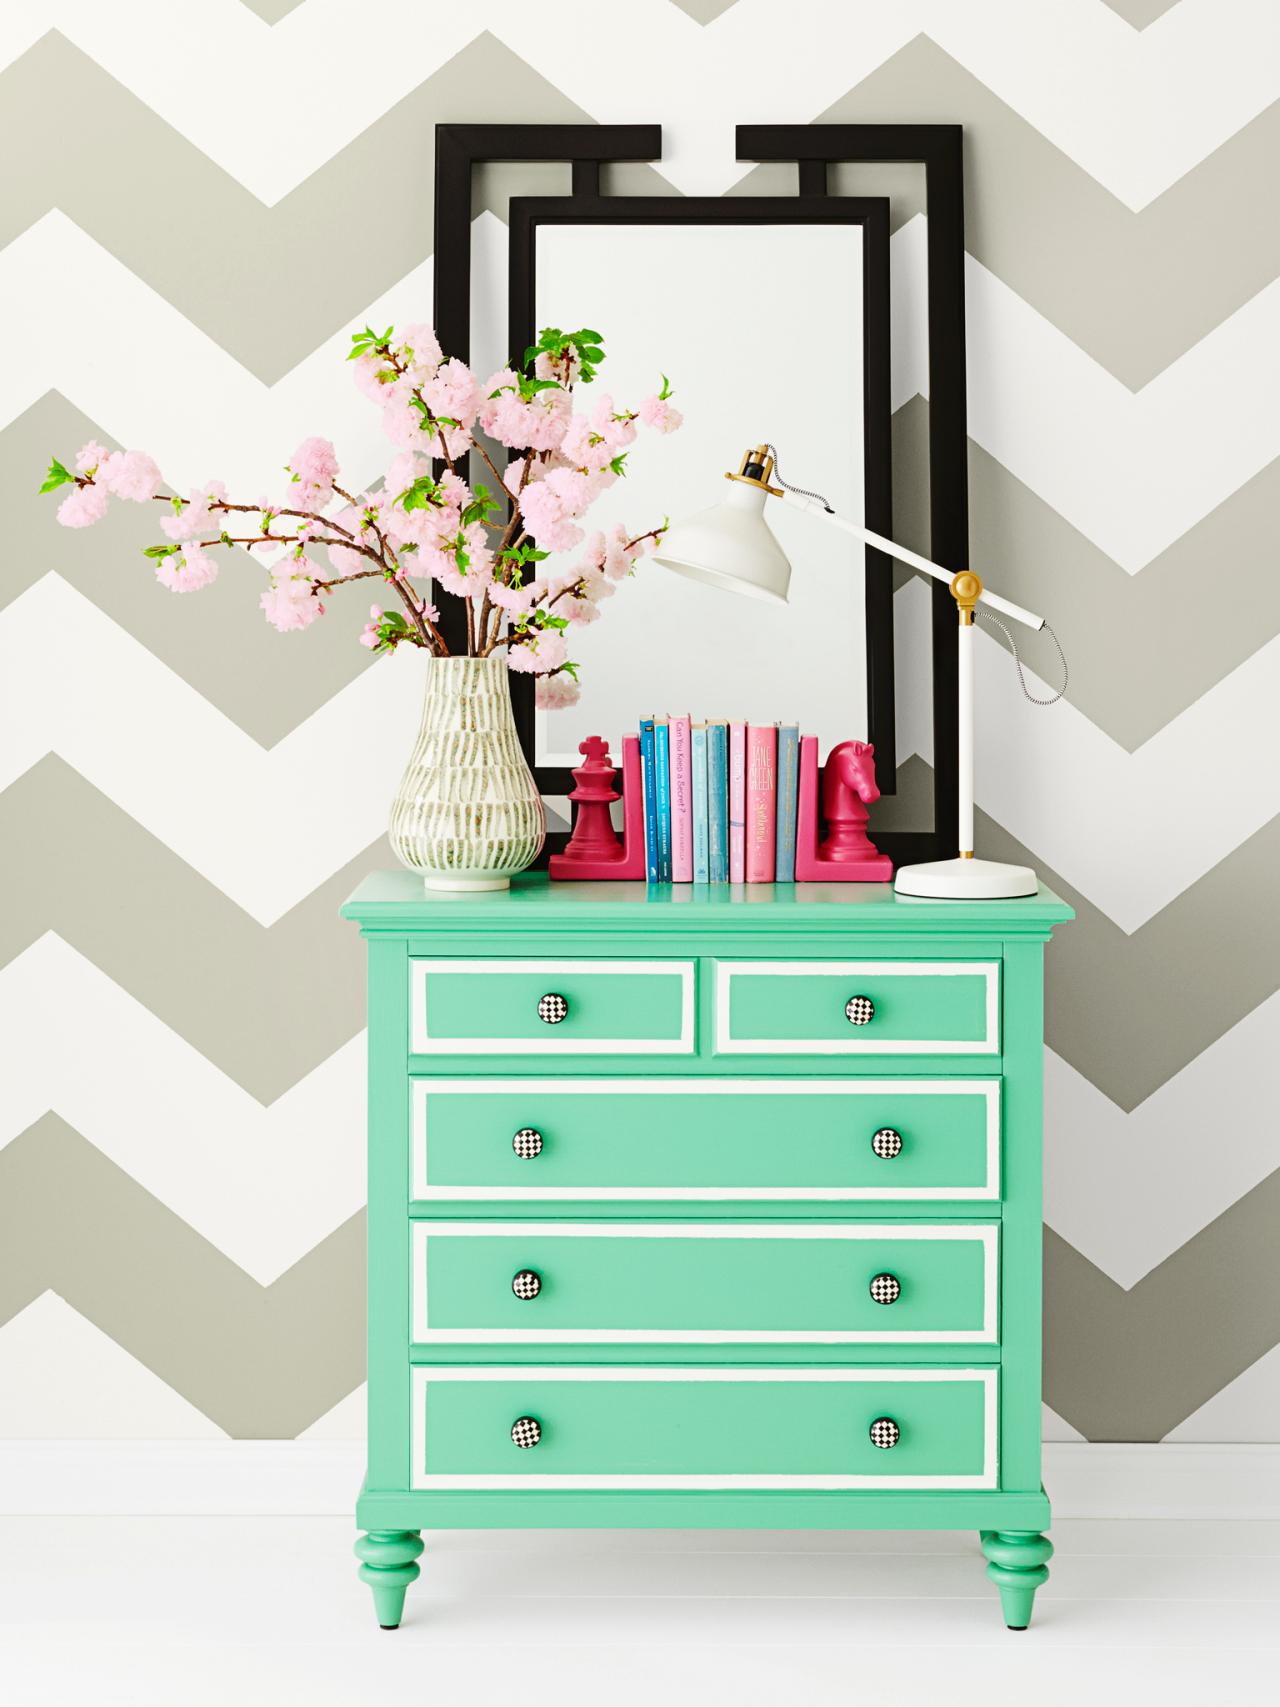 How to Paint Fun Designs on Your Dresser | HGTV